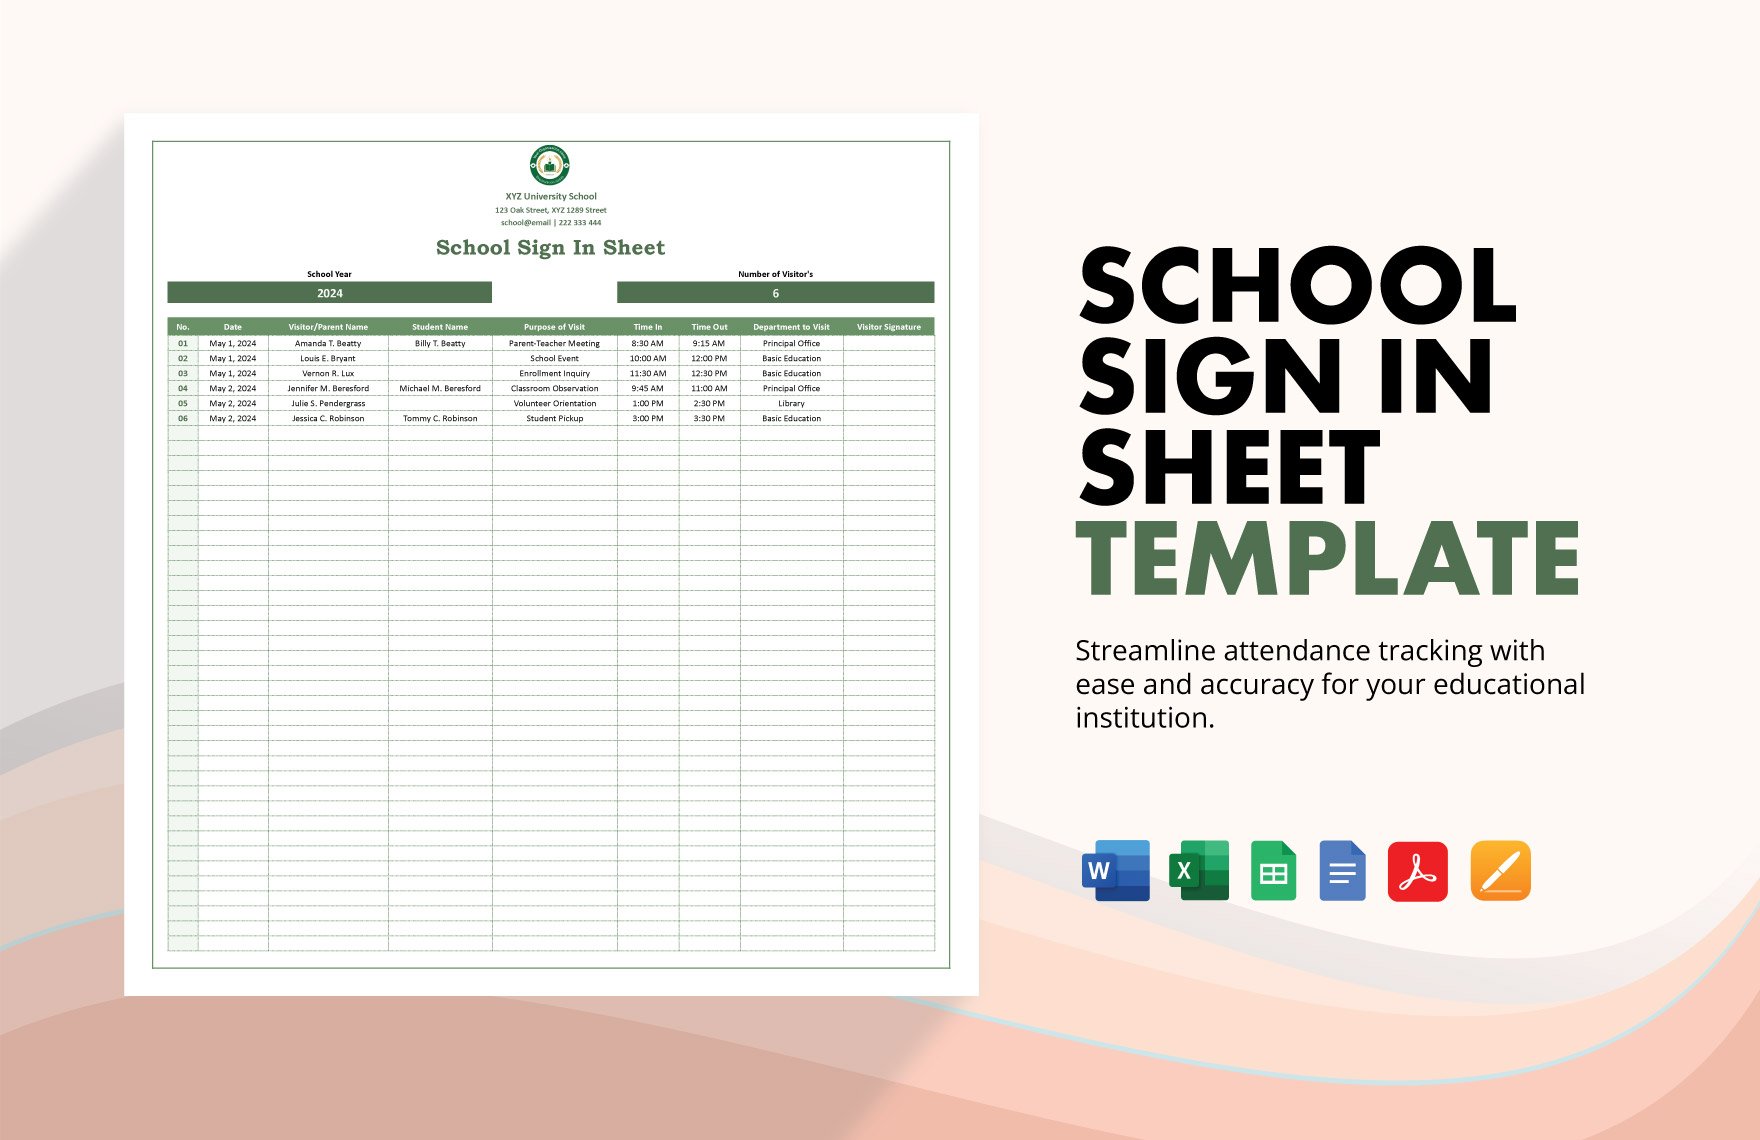 School Sign In Sheet Template in Word, Google Docs, Excel, PDF, Google Sheets, Apple Pages